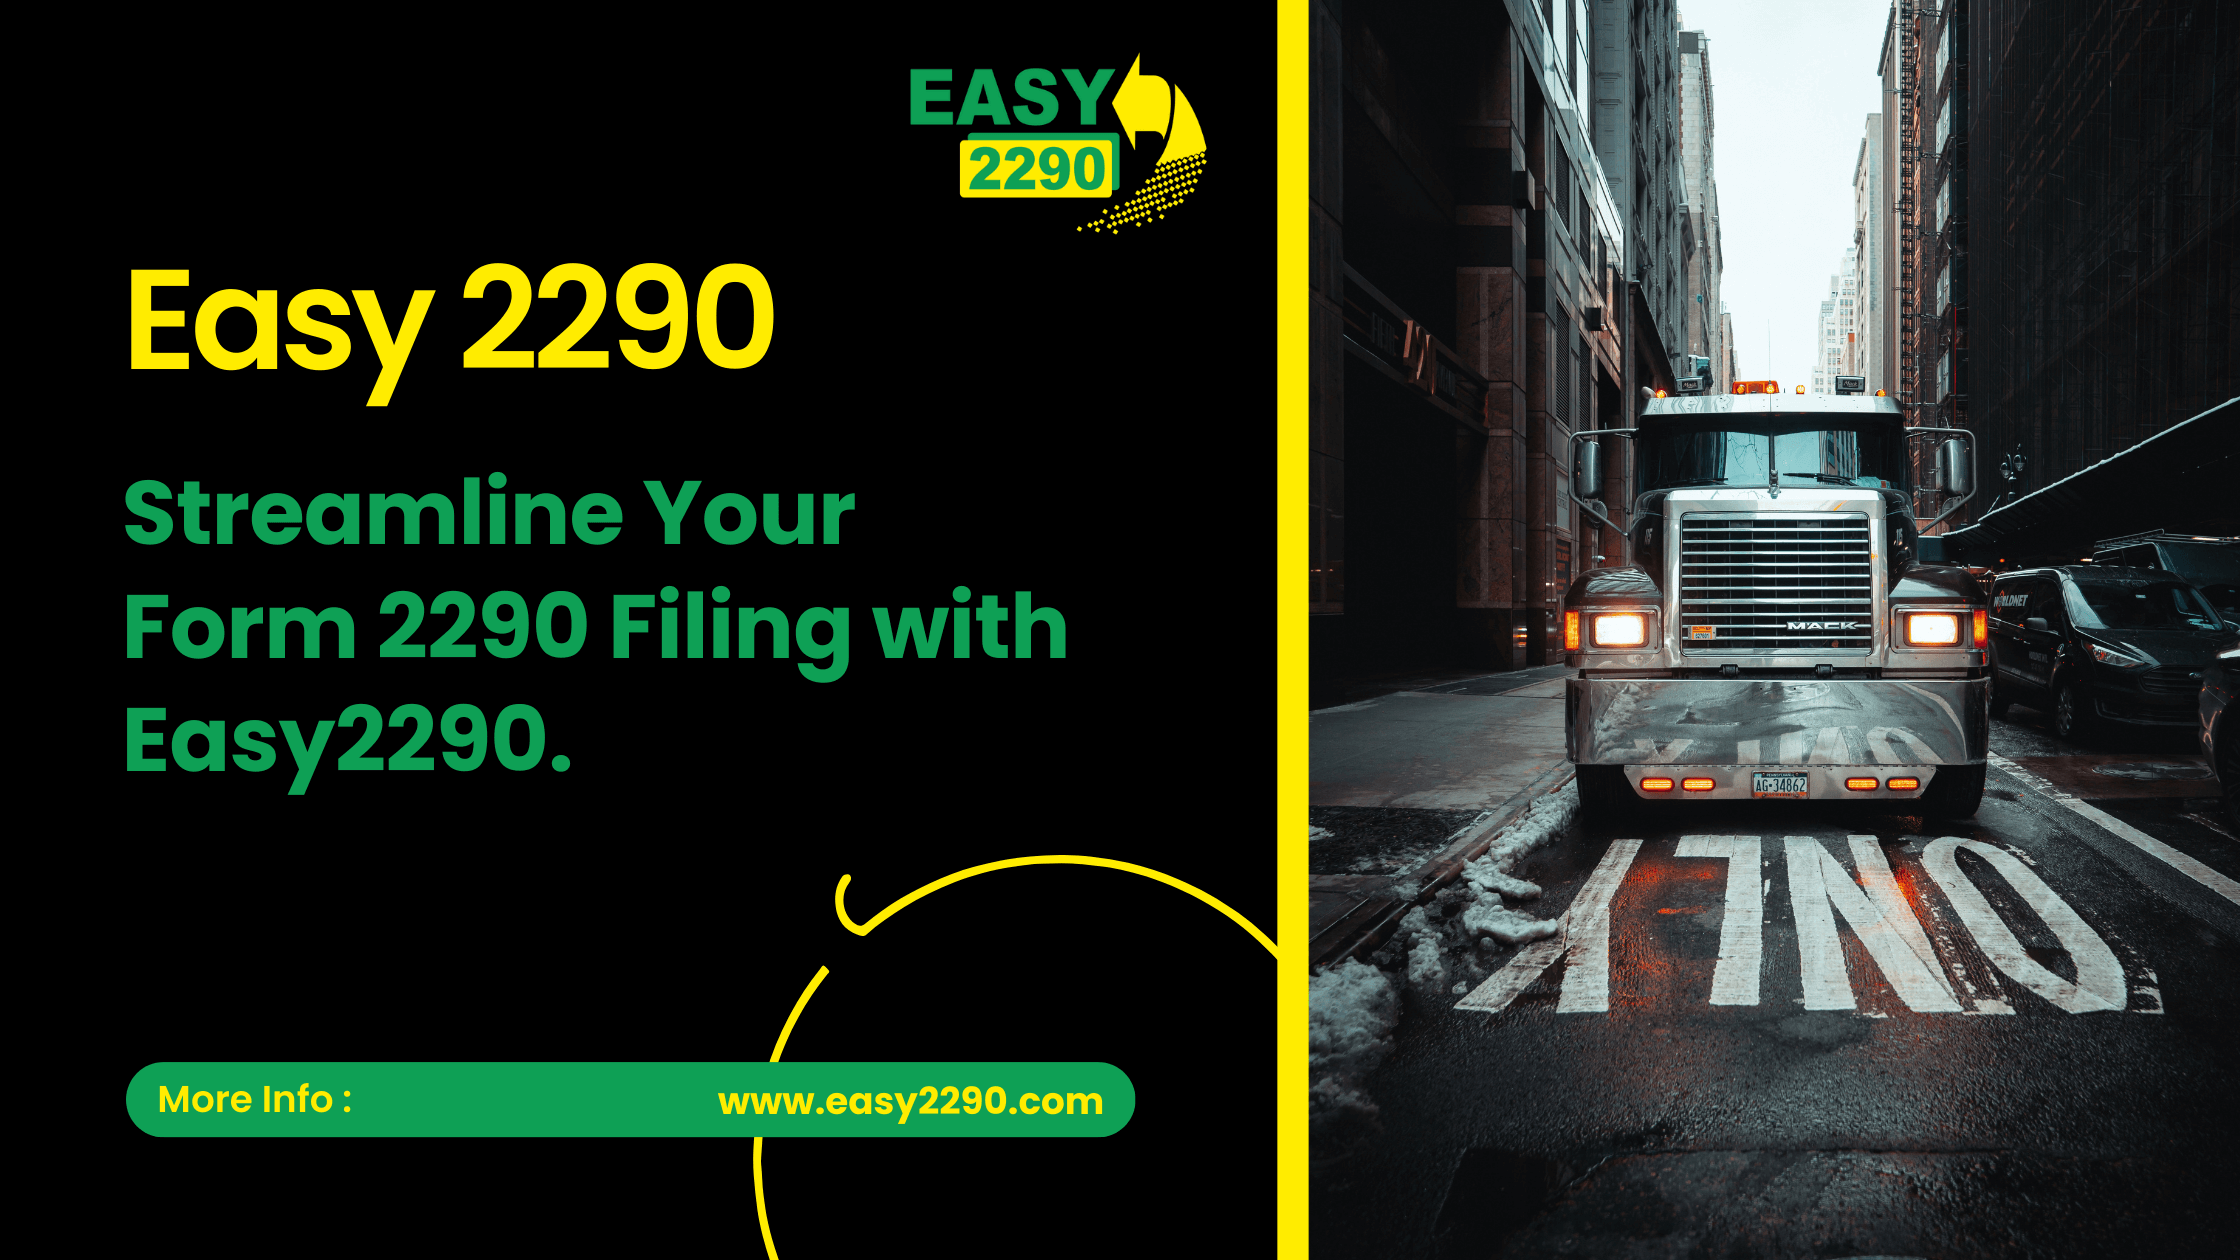 Streamline Your Form 2290 Filing with Easy2290.